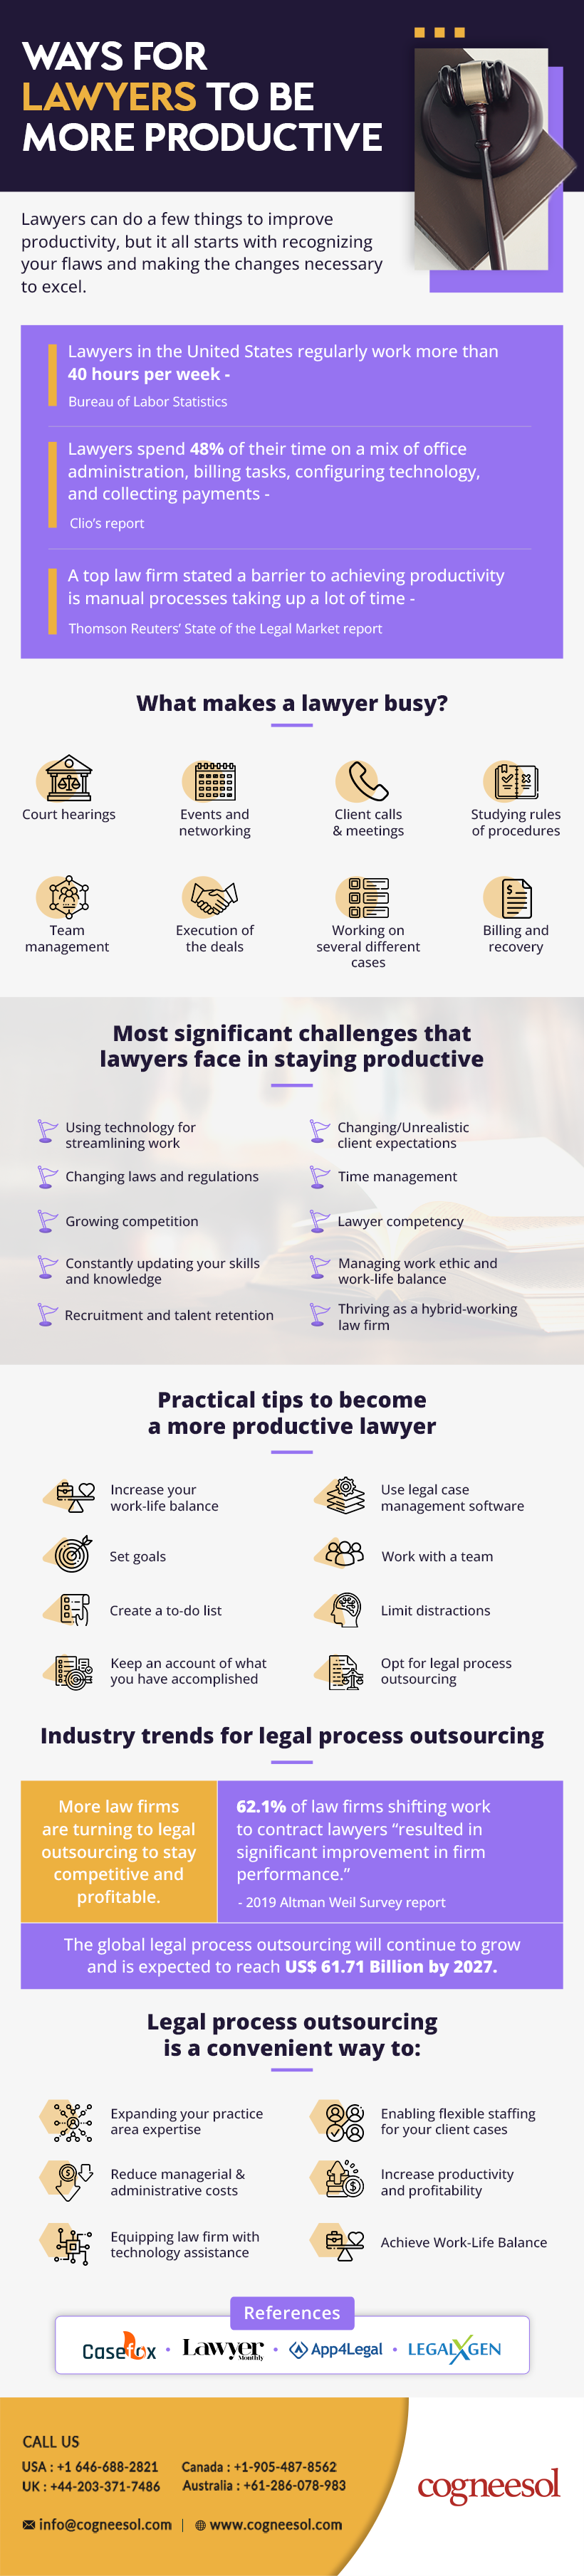 Lawyers for Productivity